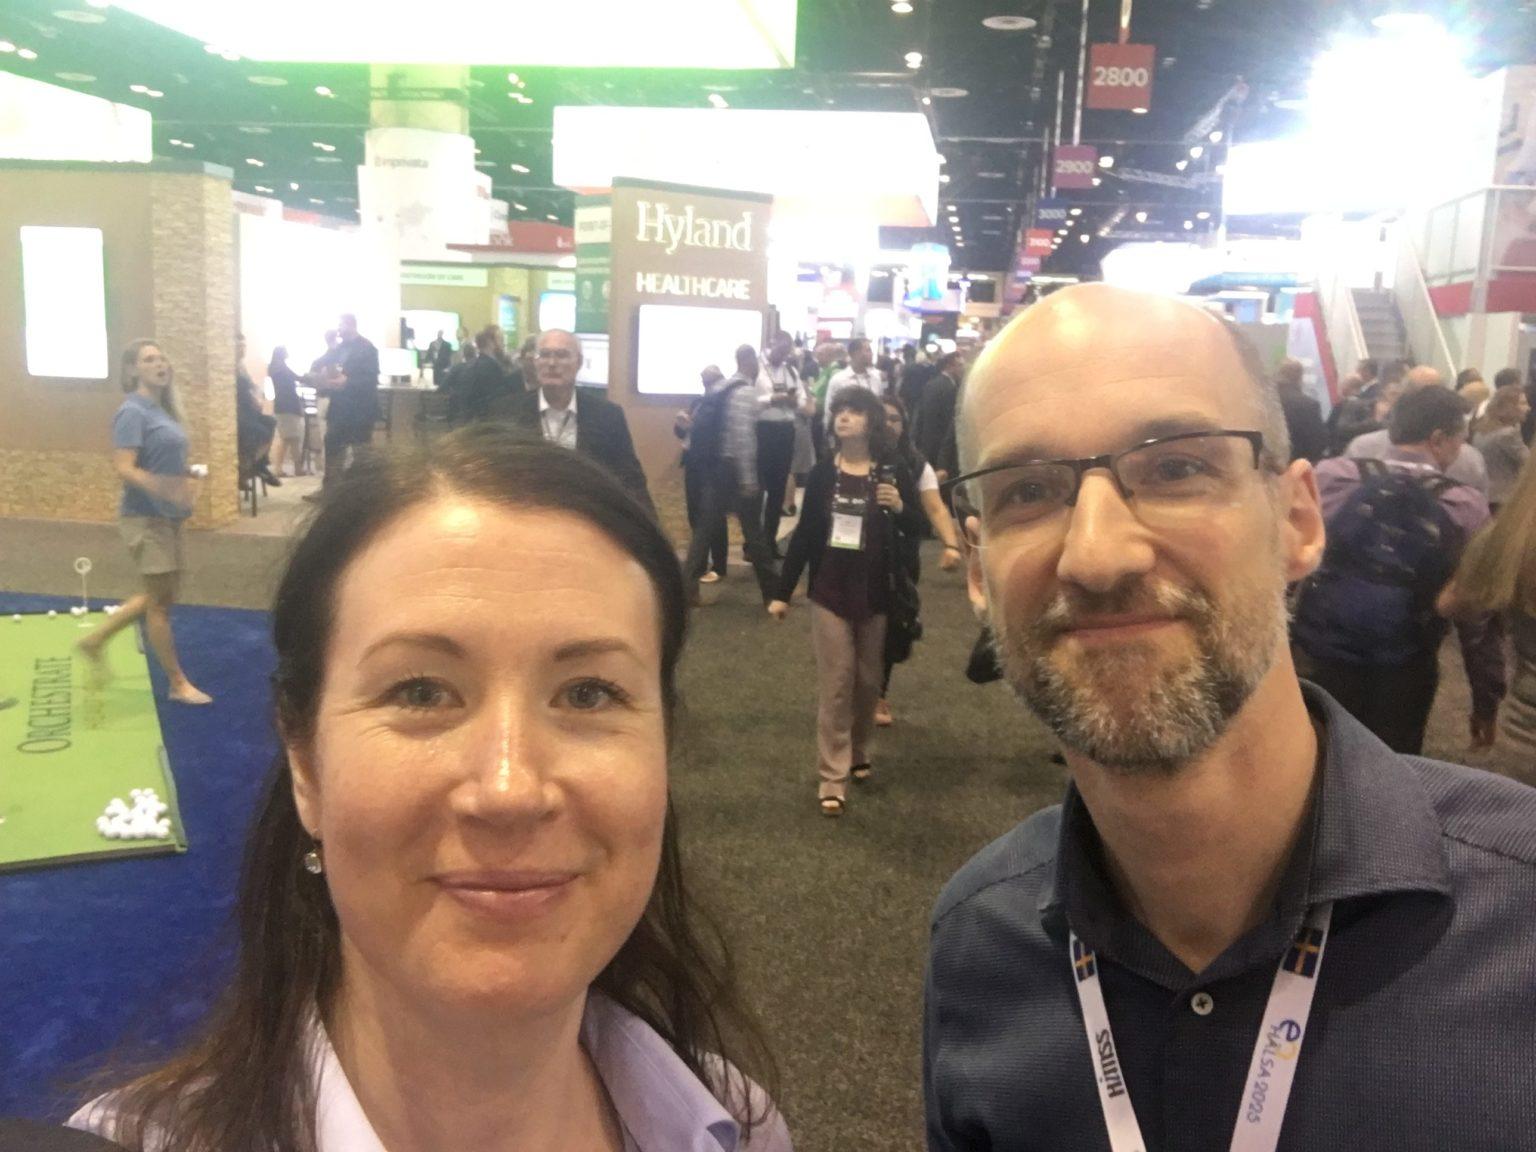 Petra and Henrik at HiMSS conferens 2019 in Orlando.